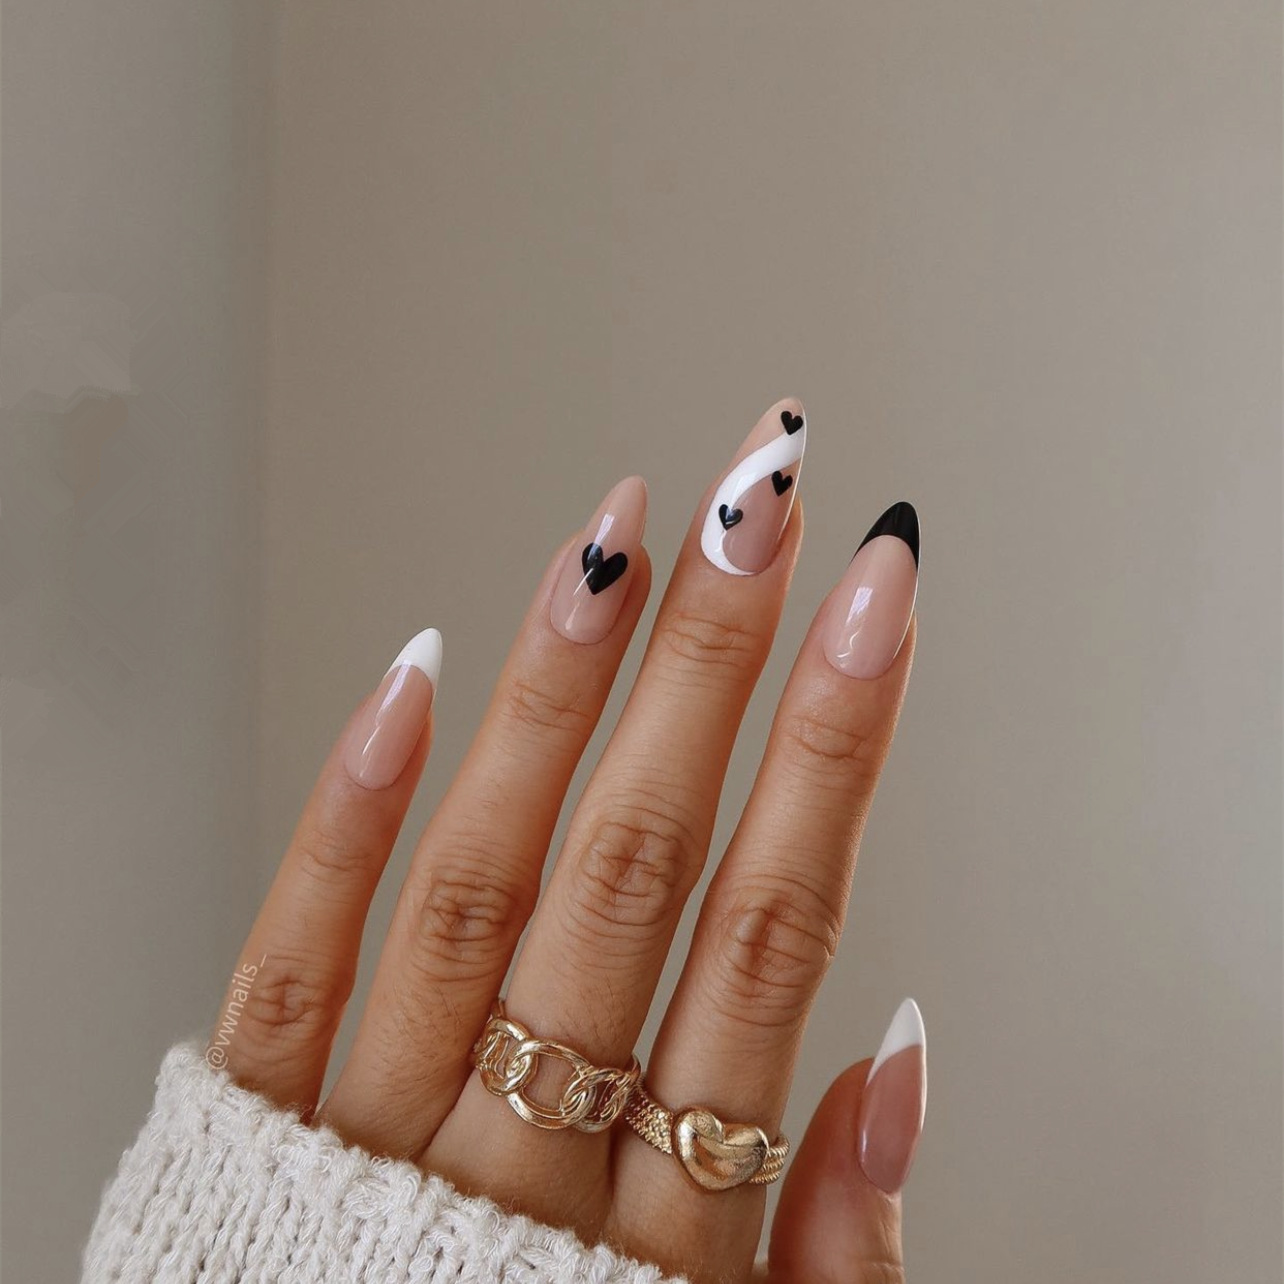 Pin on coffin nails ideas